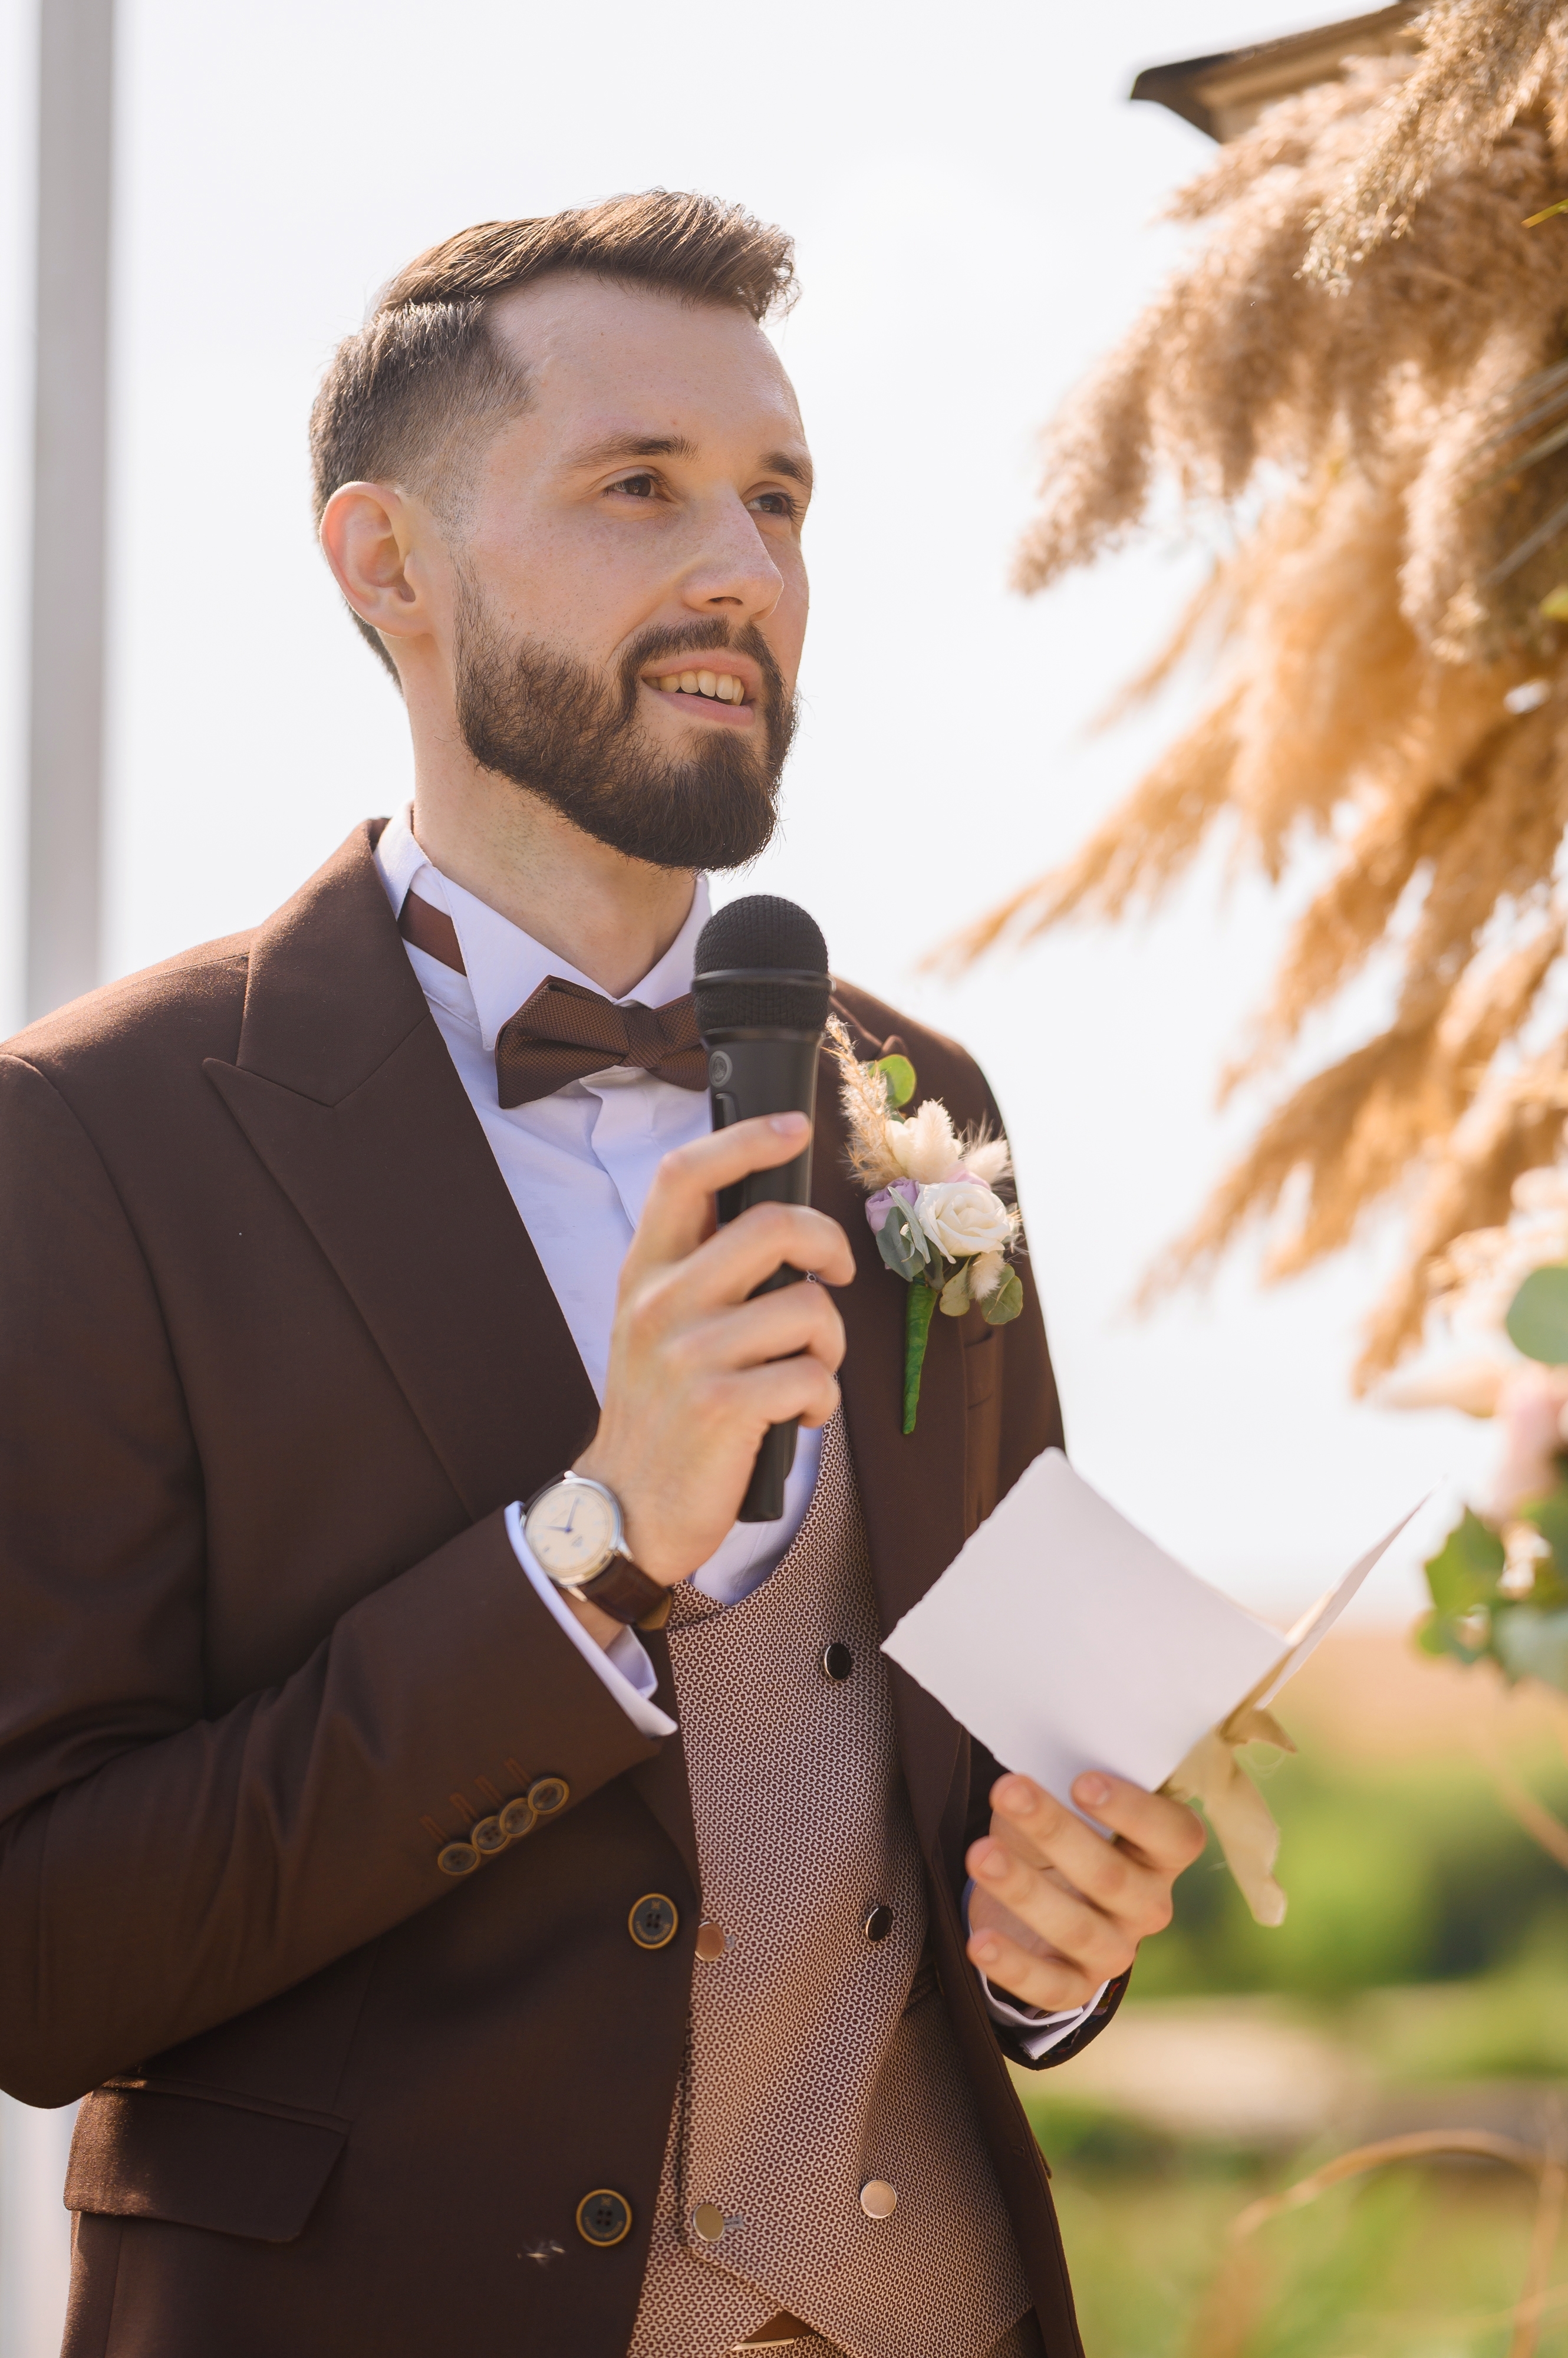 A man dressed in a brown suit with a boutonniere and bow tie giving a speech at a wedding | Source: Shutterstock